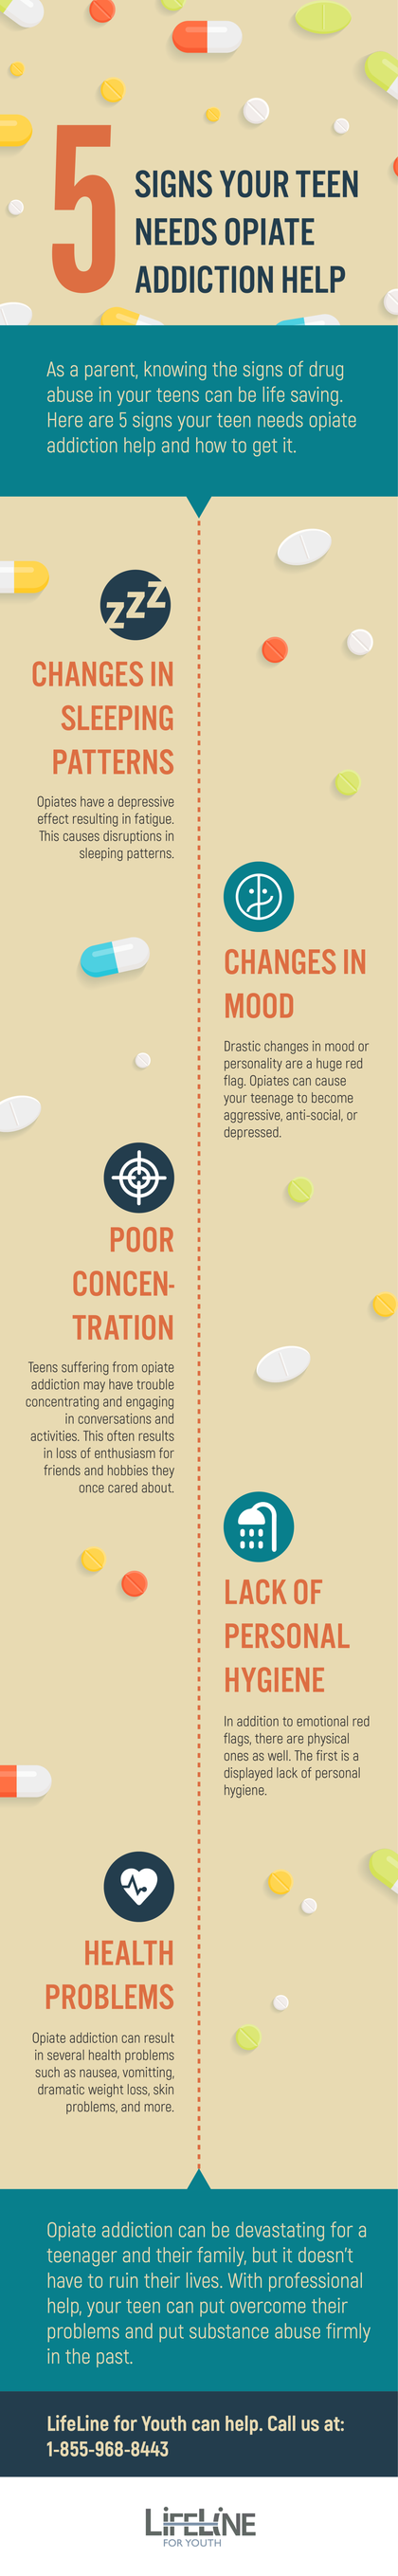 Five Signs Your Teen Needs Opioid Addiction Help Info Graph – North Salt Lake, Utah – Lifeline for Youth